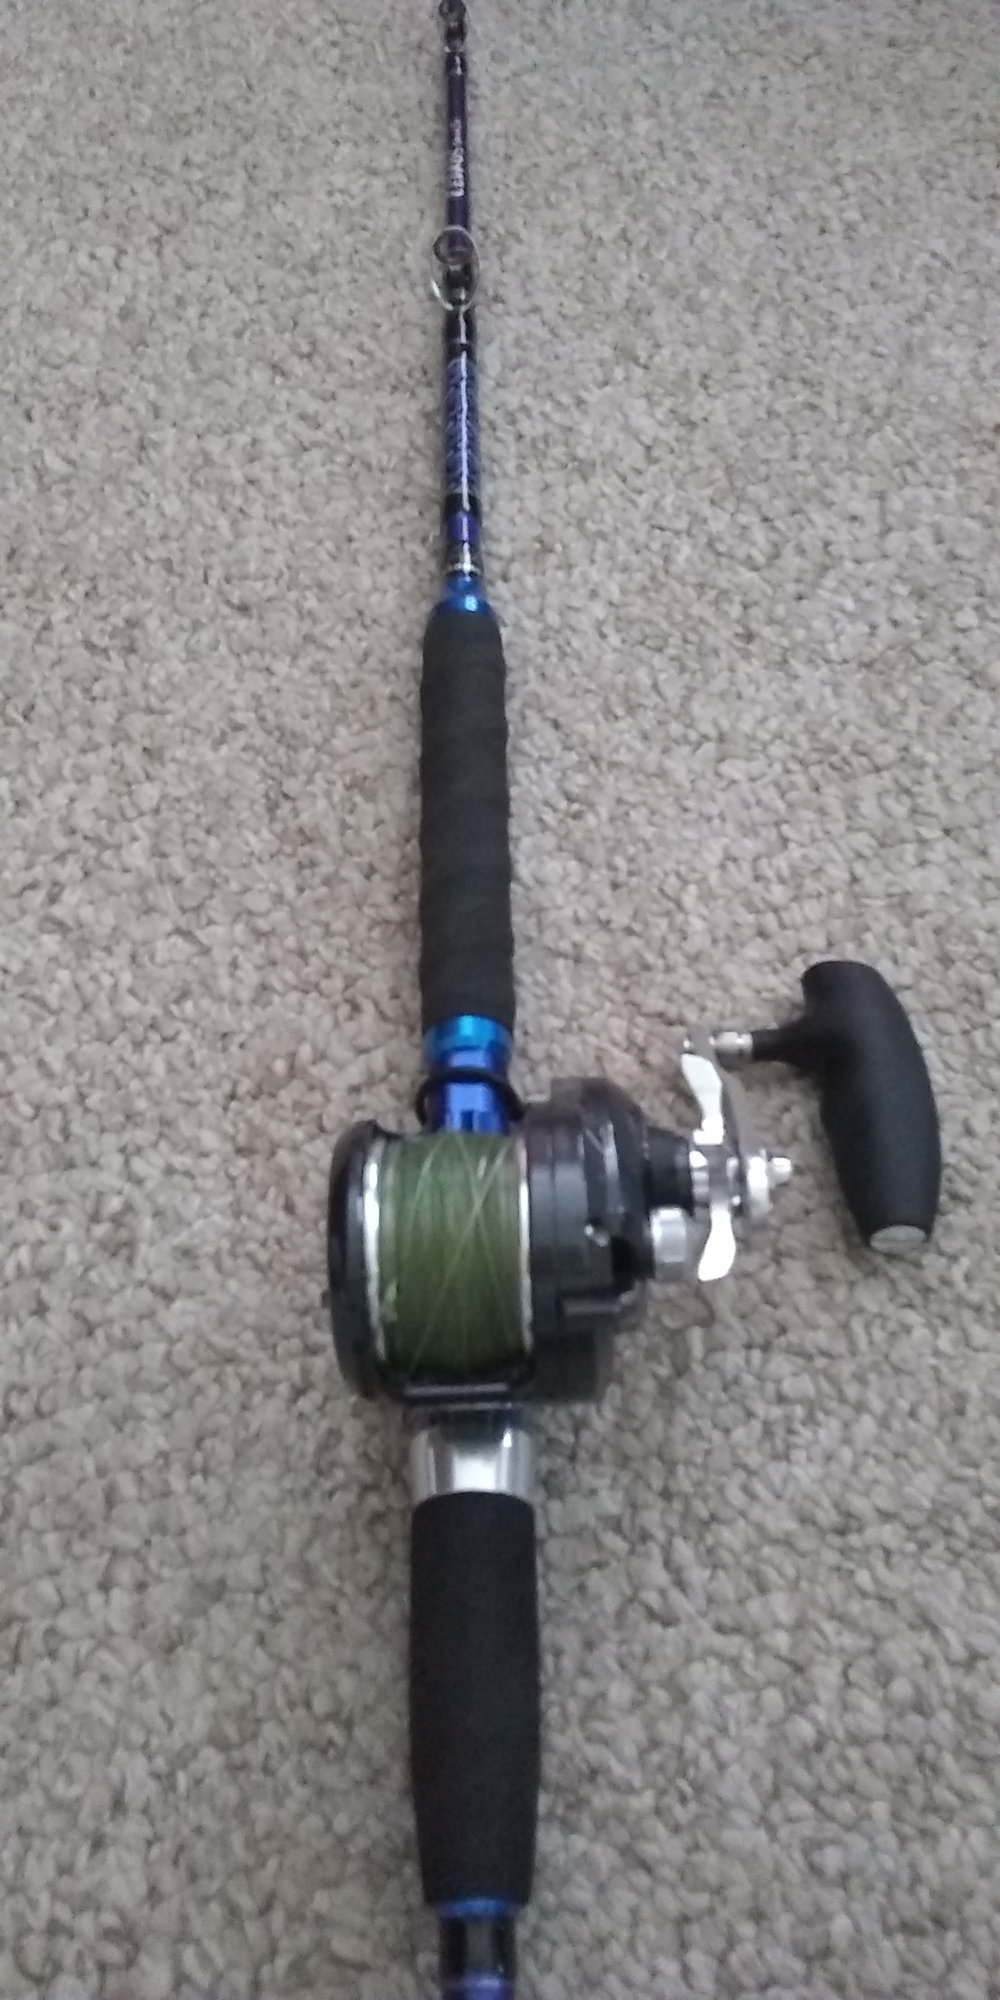 Best bottom fishing reels/rods - The Hull Truth - Boating and